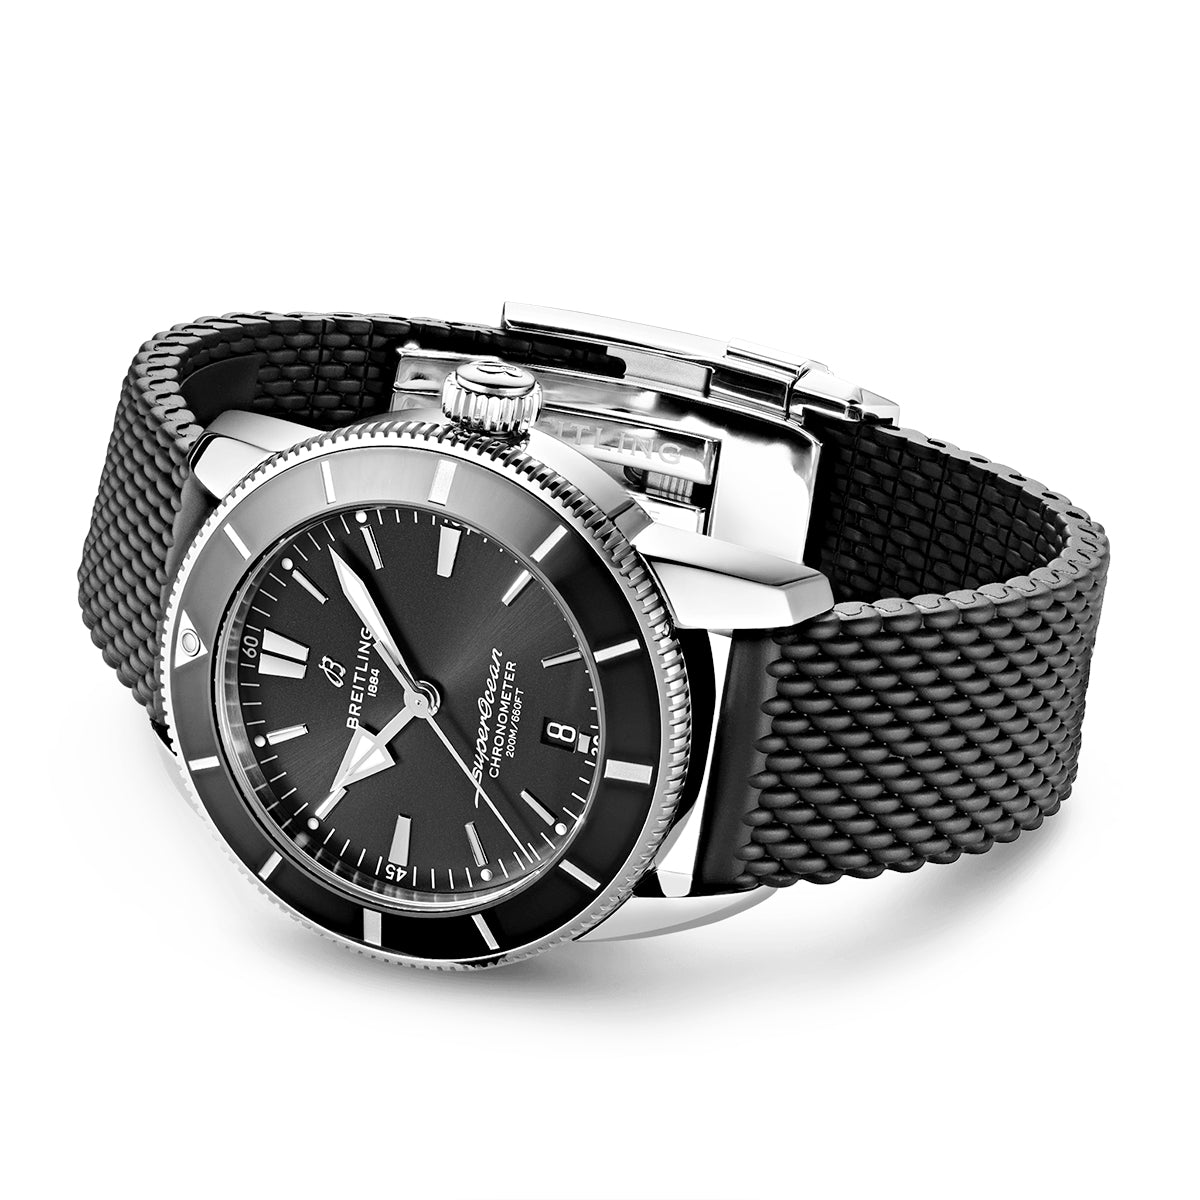 Superocean Heritage II 44mm Black Dial Automatic Rubber Strap Watch